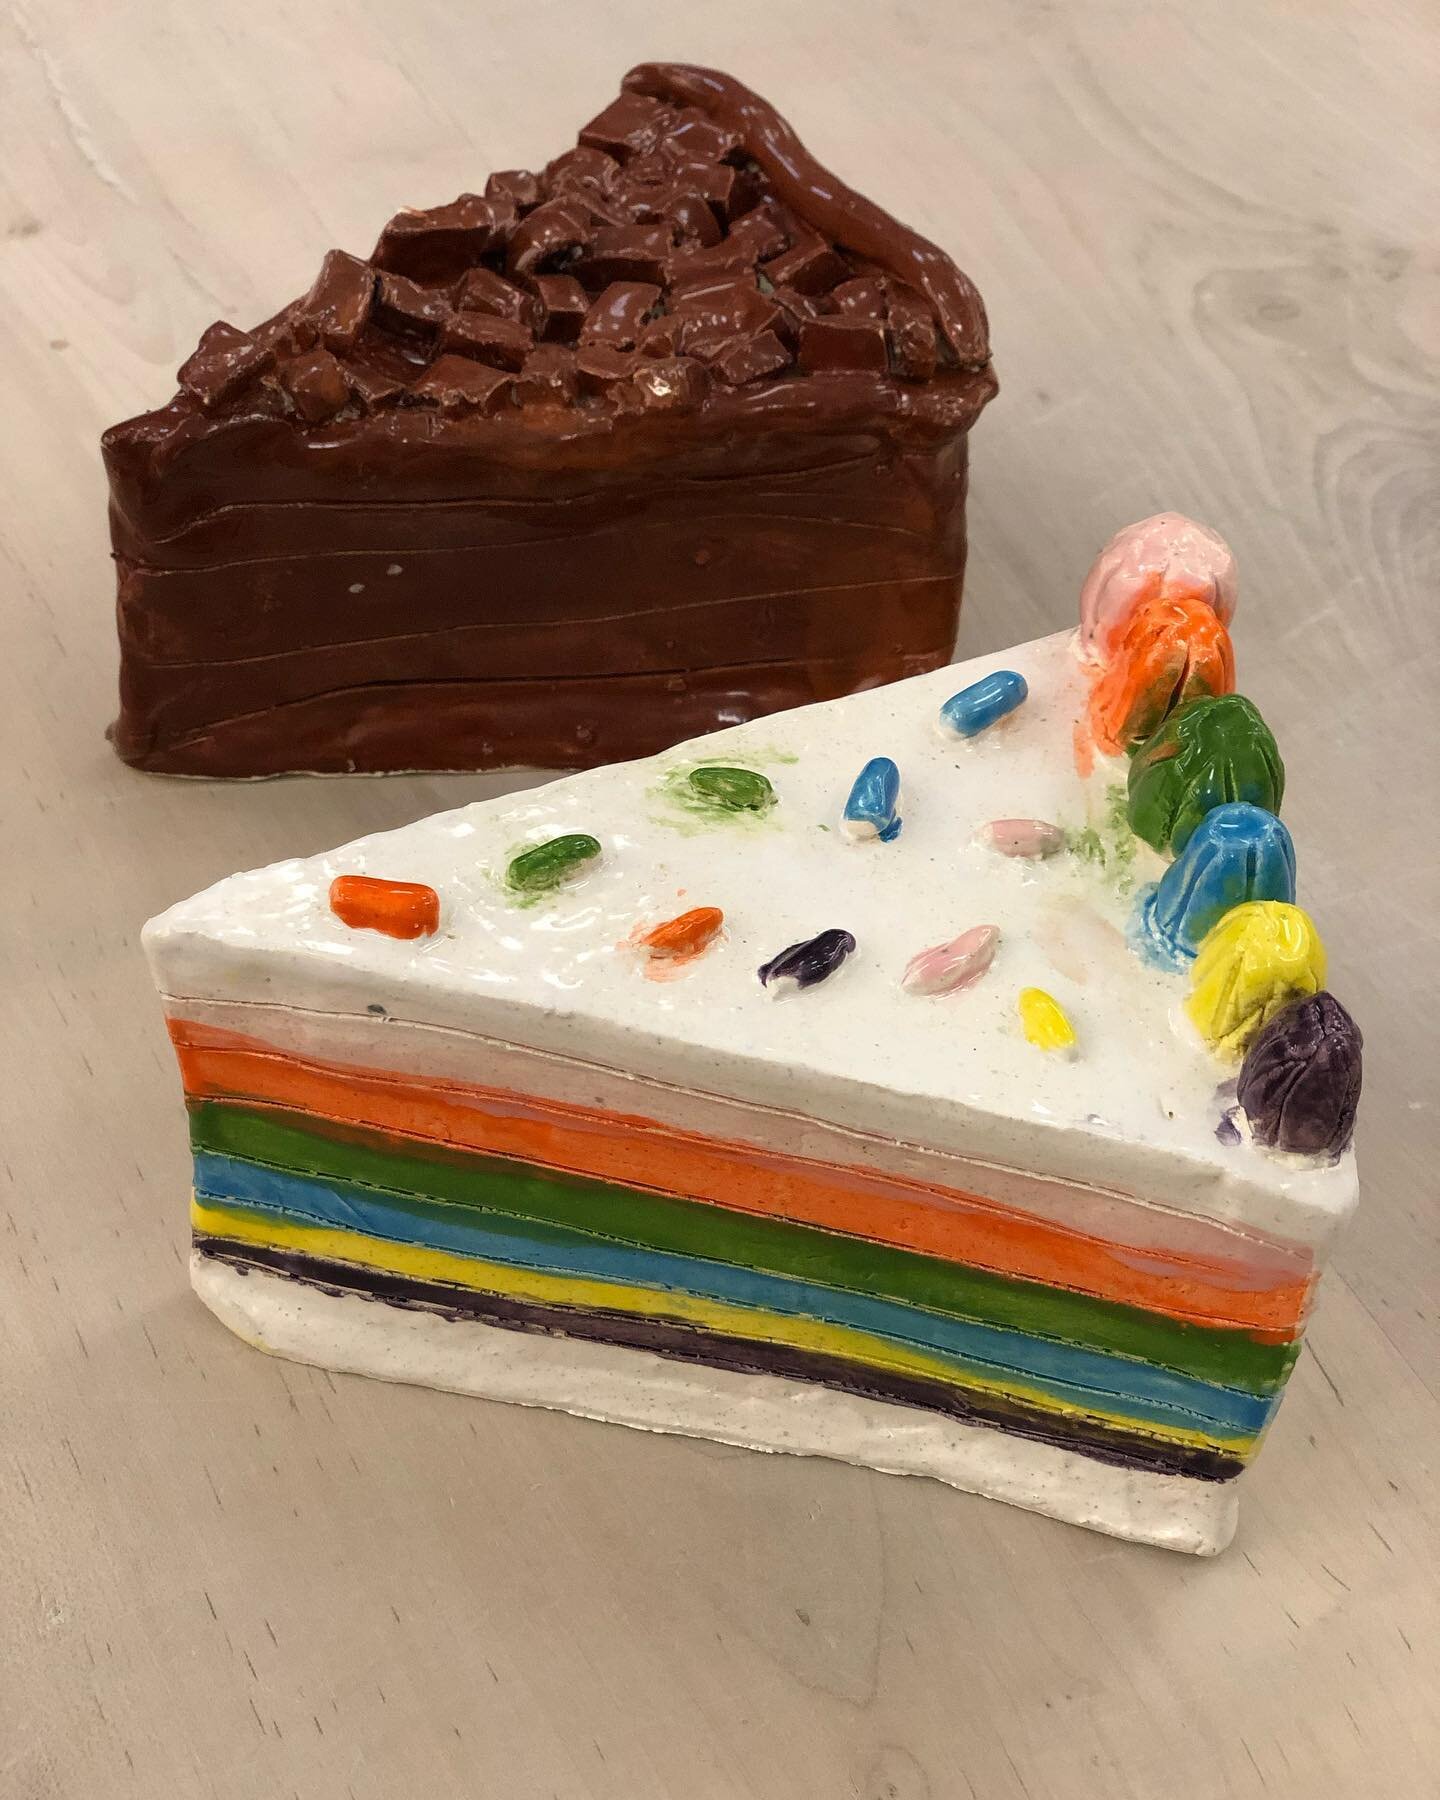 Cake or ceramic? Sliced cake is a  middle school project and pies from after school class. Led by @bohemitu 
 🍰🎂🥮
#tribecaclayworks #manhattanyouth #clay #ceramics #tribeca #sculpture #ceramicart #ceramiclove #ceramicartistsofinstagram #sculpture 